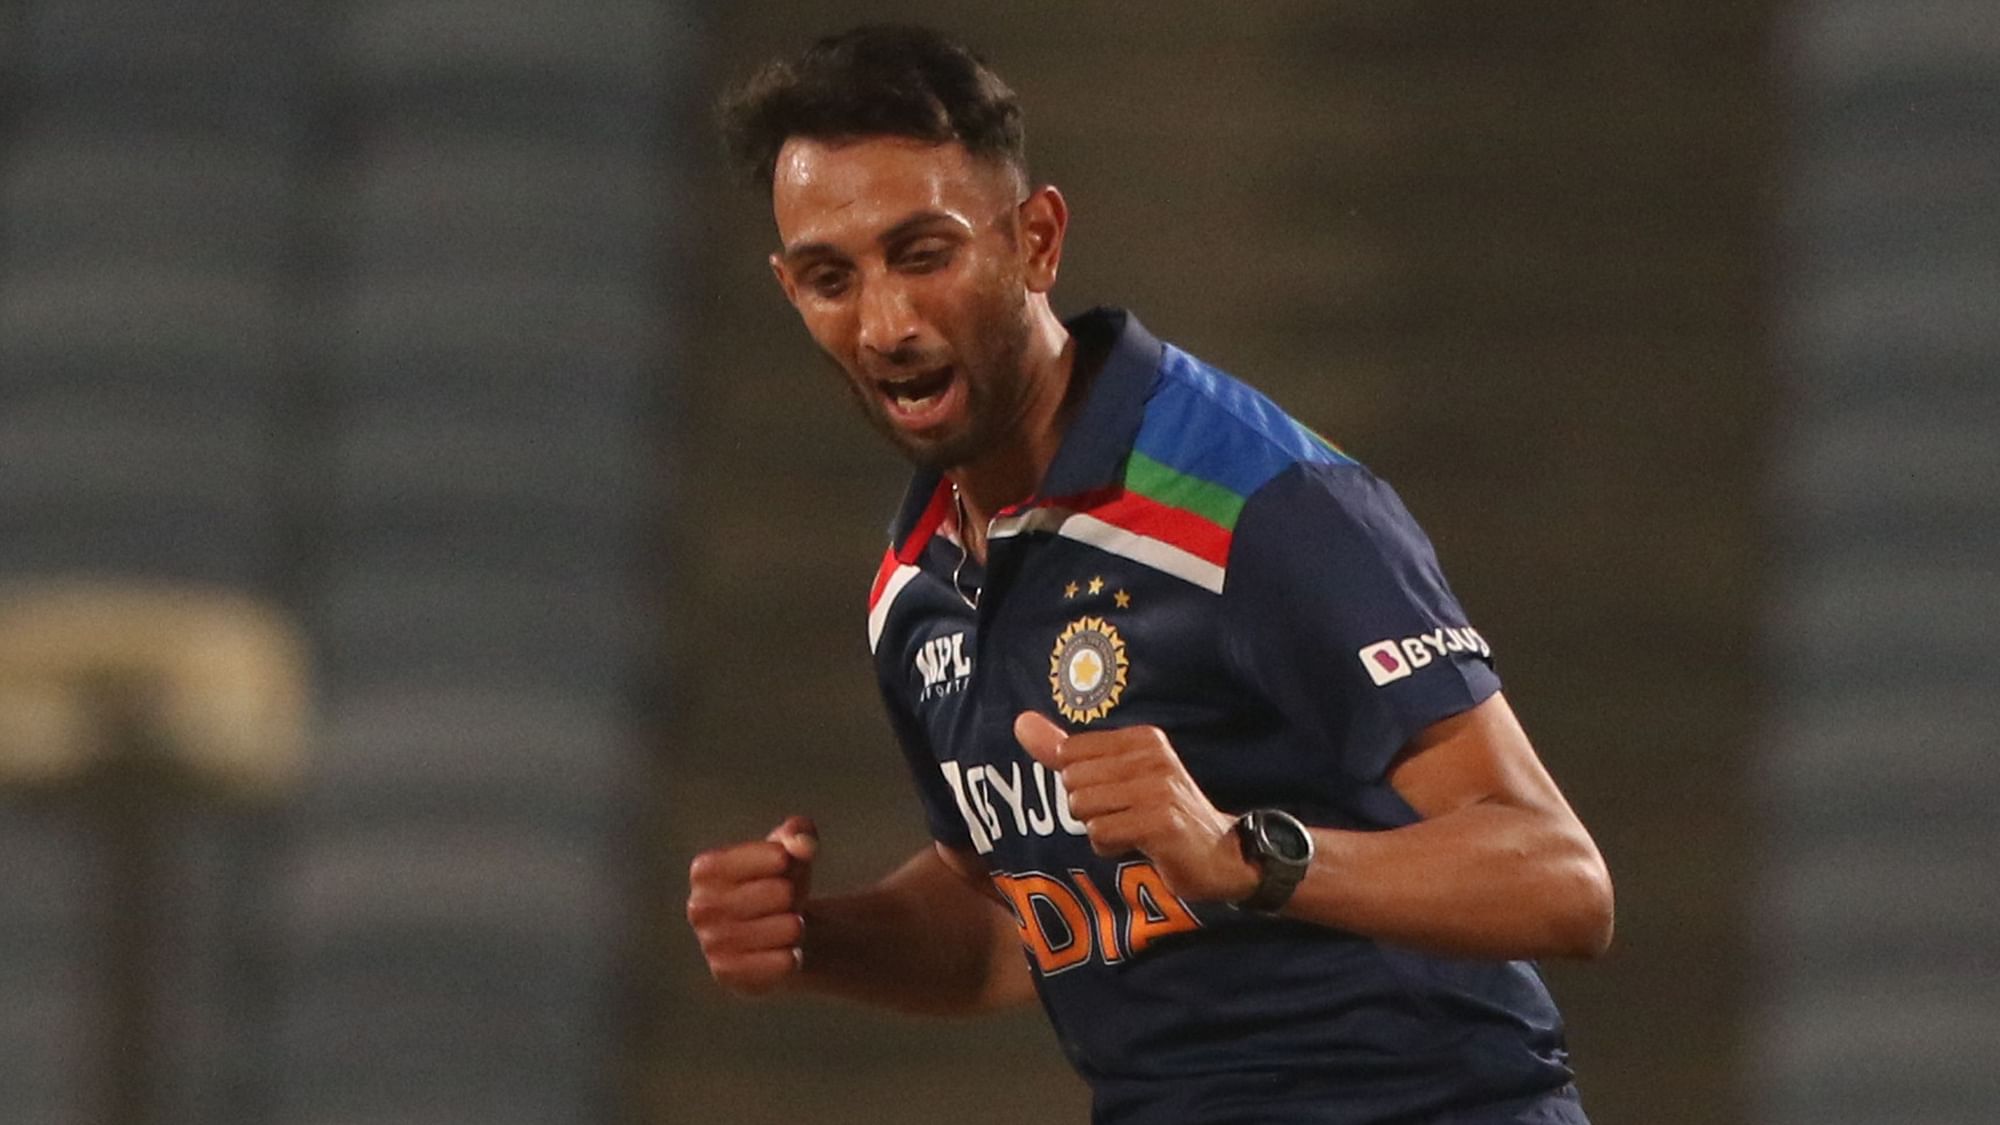 Fast bowler M Prasidh Krishna is part of India’s extended squad for Test matches in England.